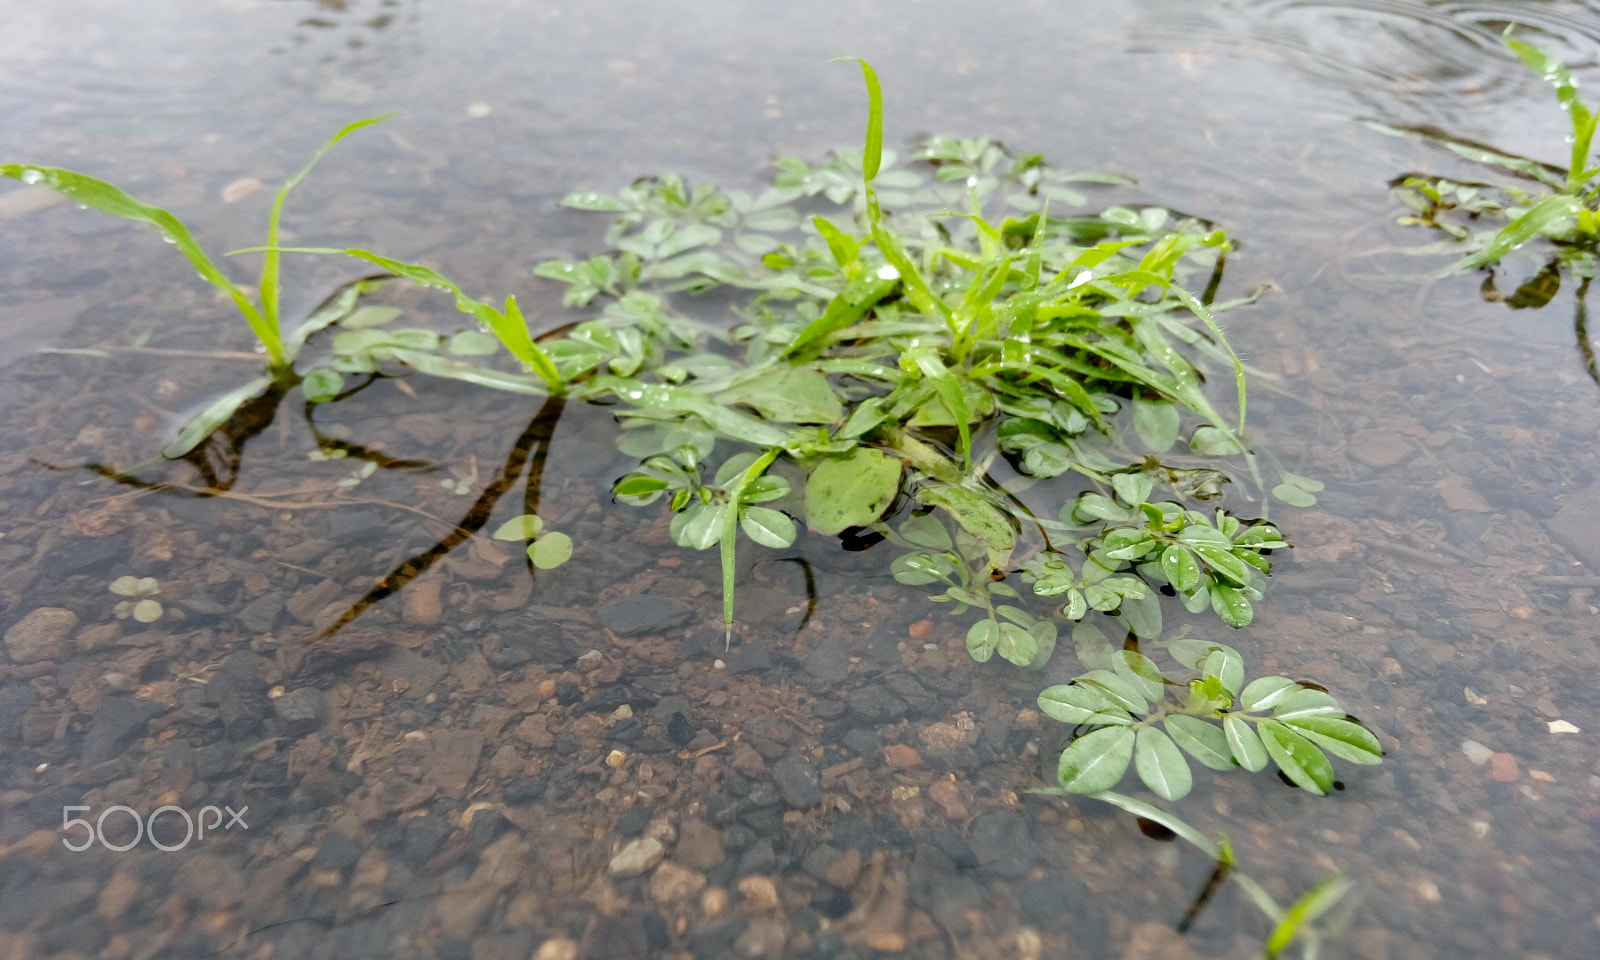 HTC DESIRE 820G PLUS DUAL SIM sample photo. Grass in water photography